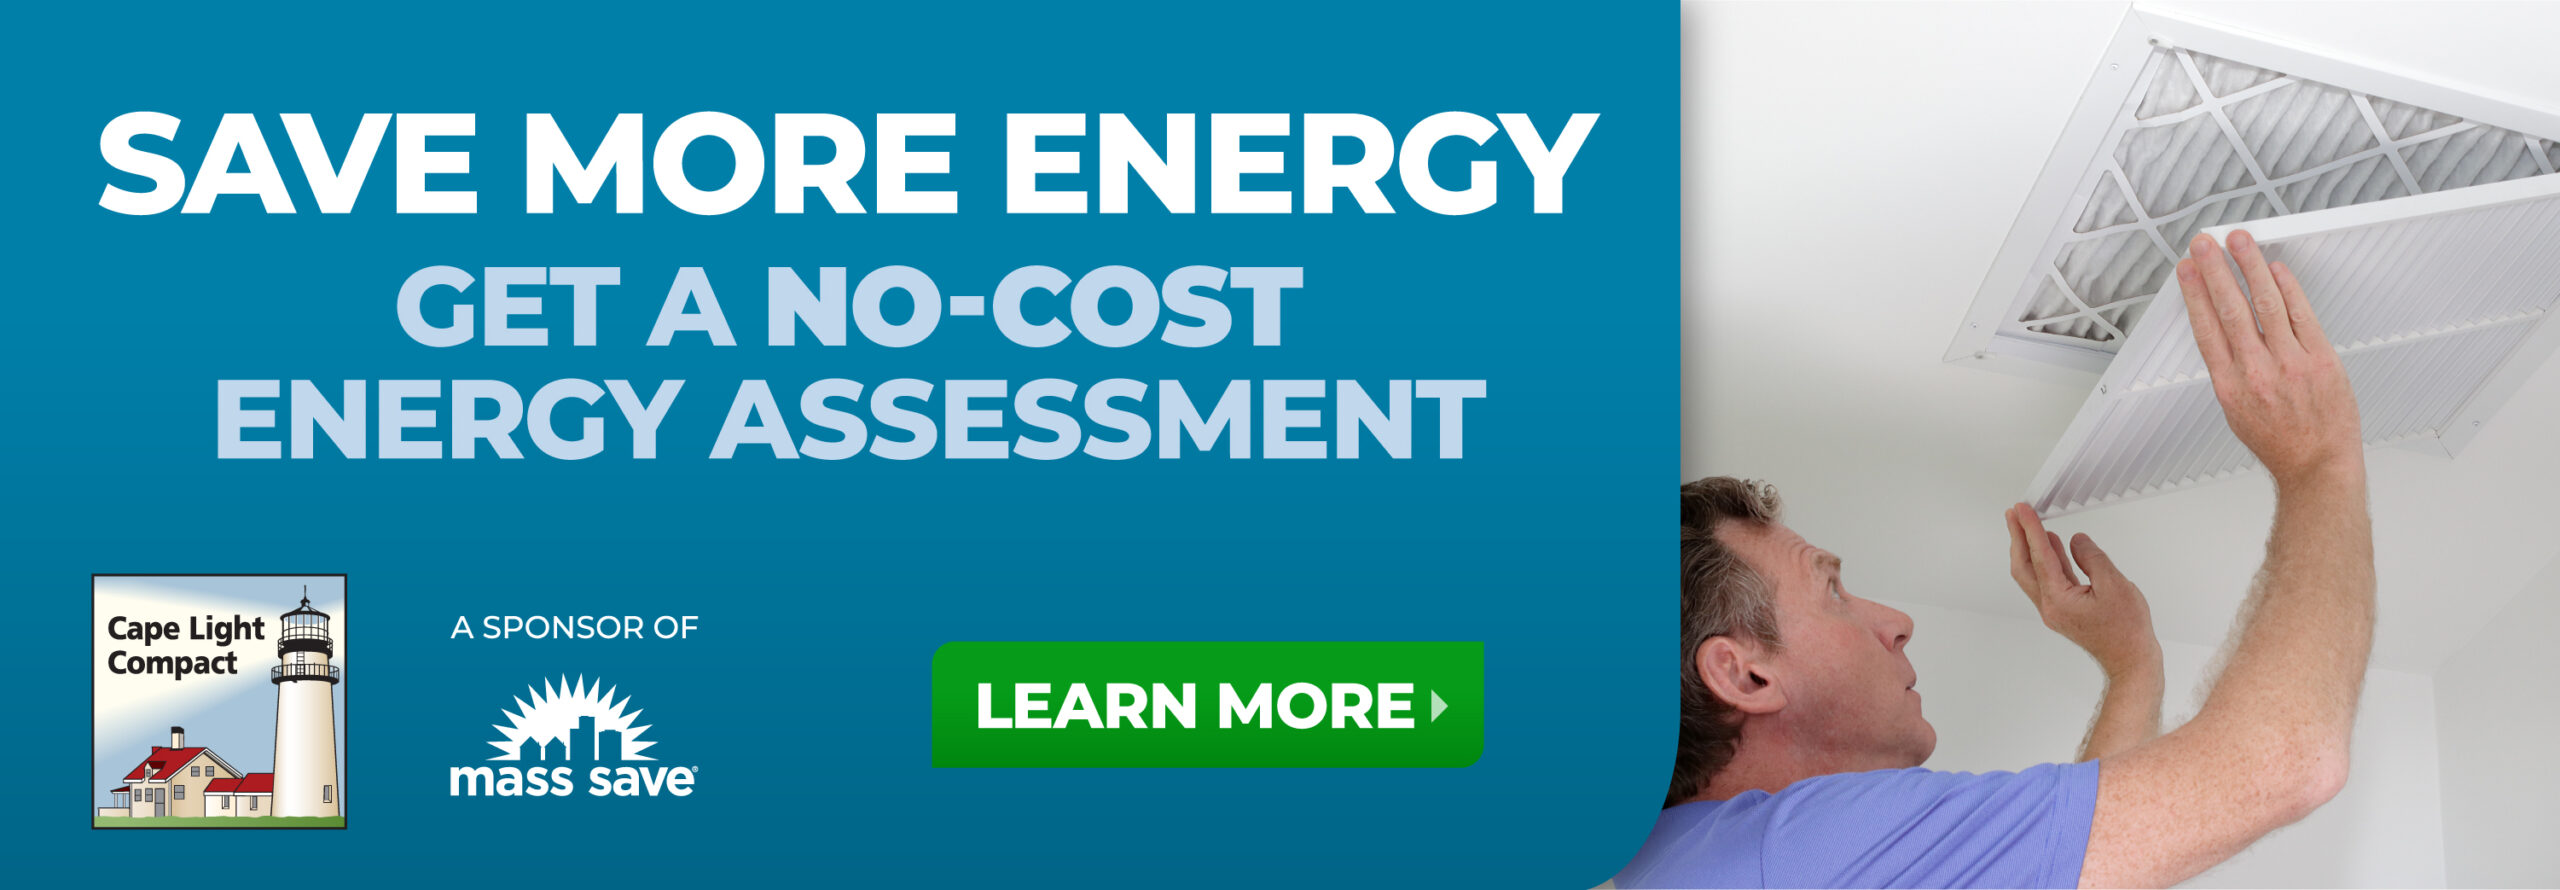 Cape Light Compact, no cost energy assessment.